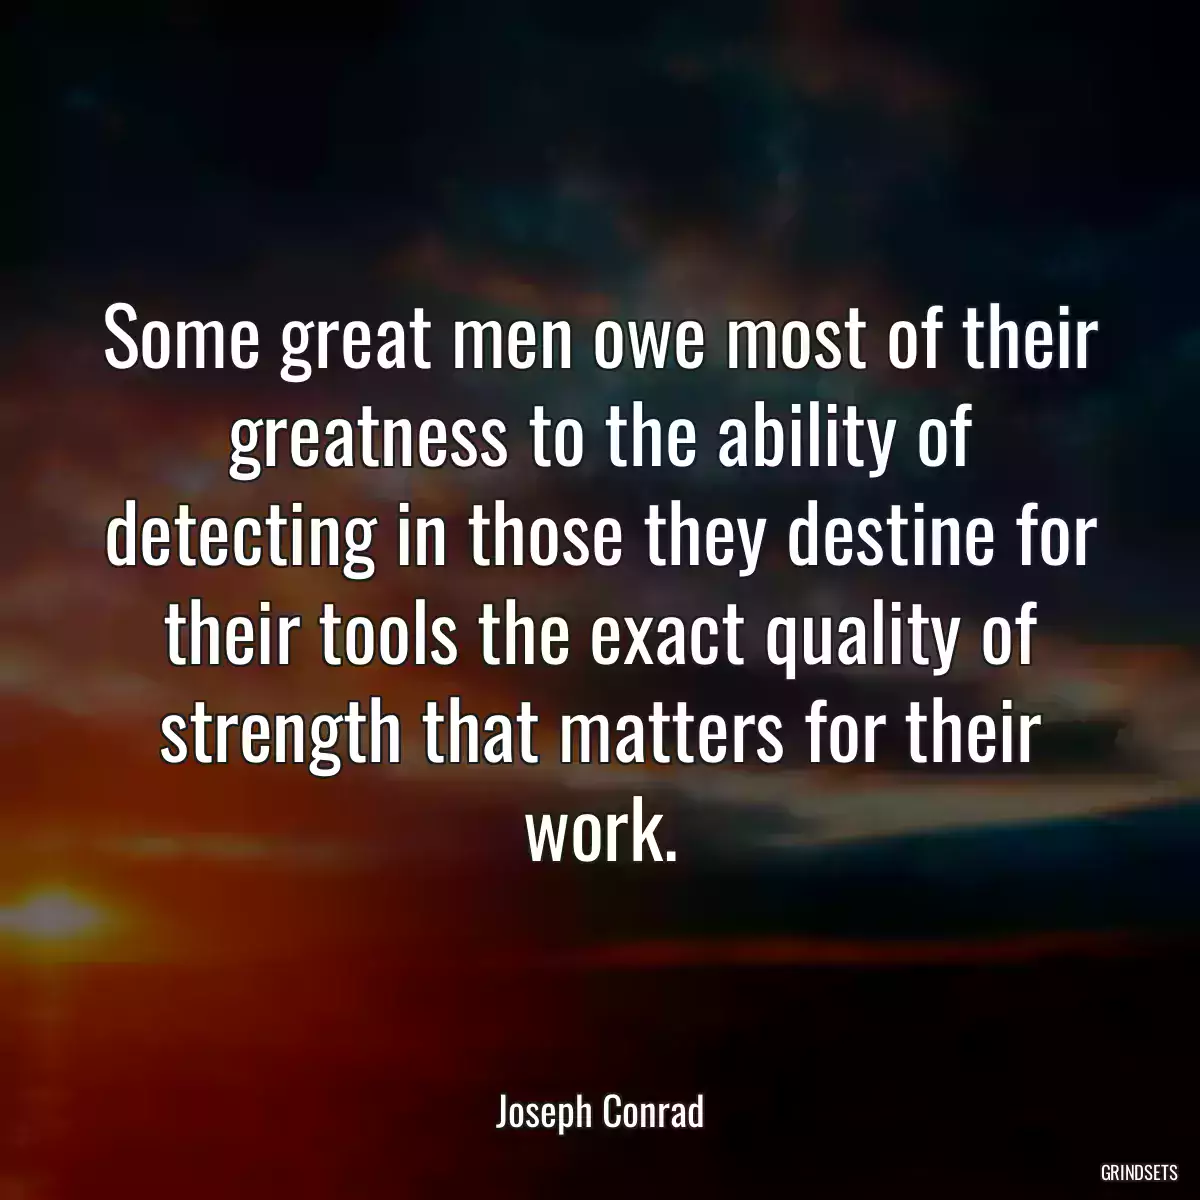 Some great men owe most of their greatness to the ability of detecting in those they destine for their tools the exact quality of strength that matters for their work.